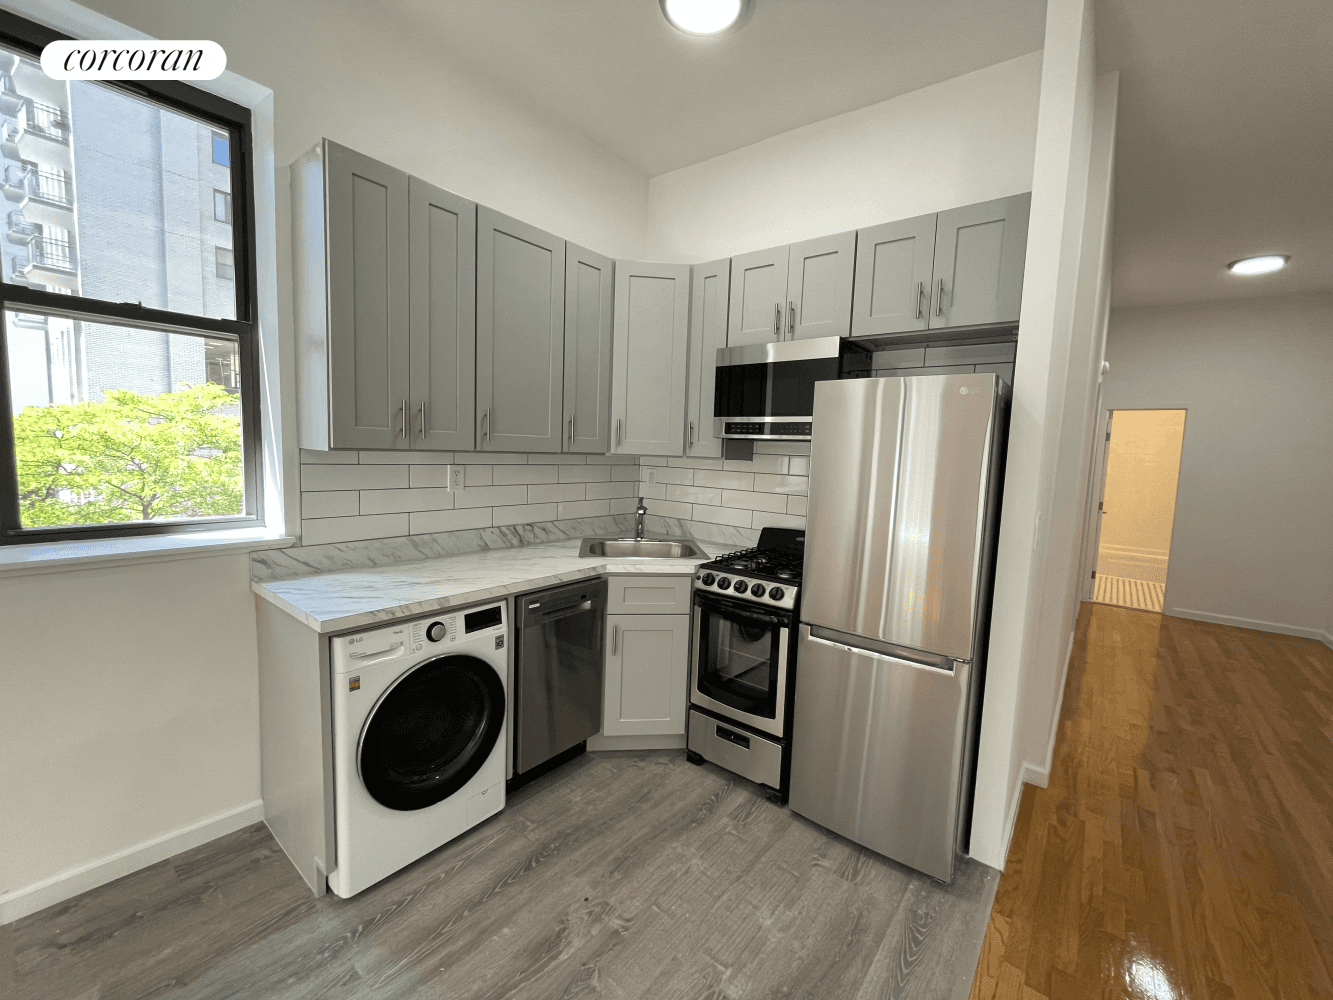 Huge Renovated Two Bedroom apartment in the heart of Midtown with WASHER DRYER IN UNIT.